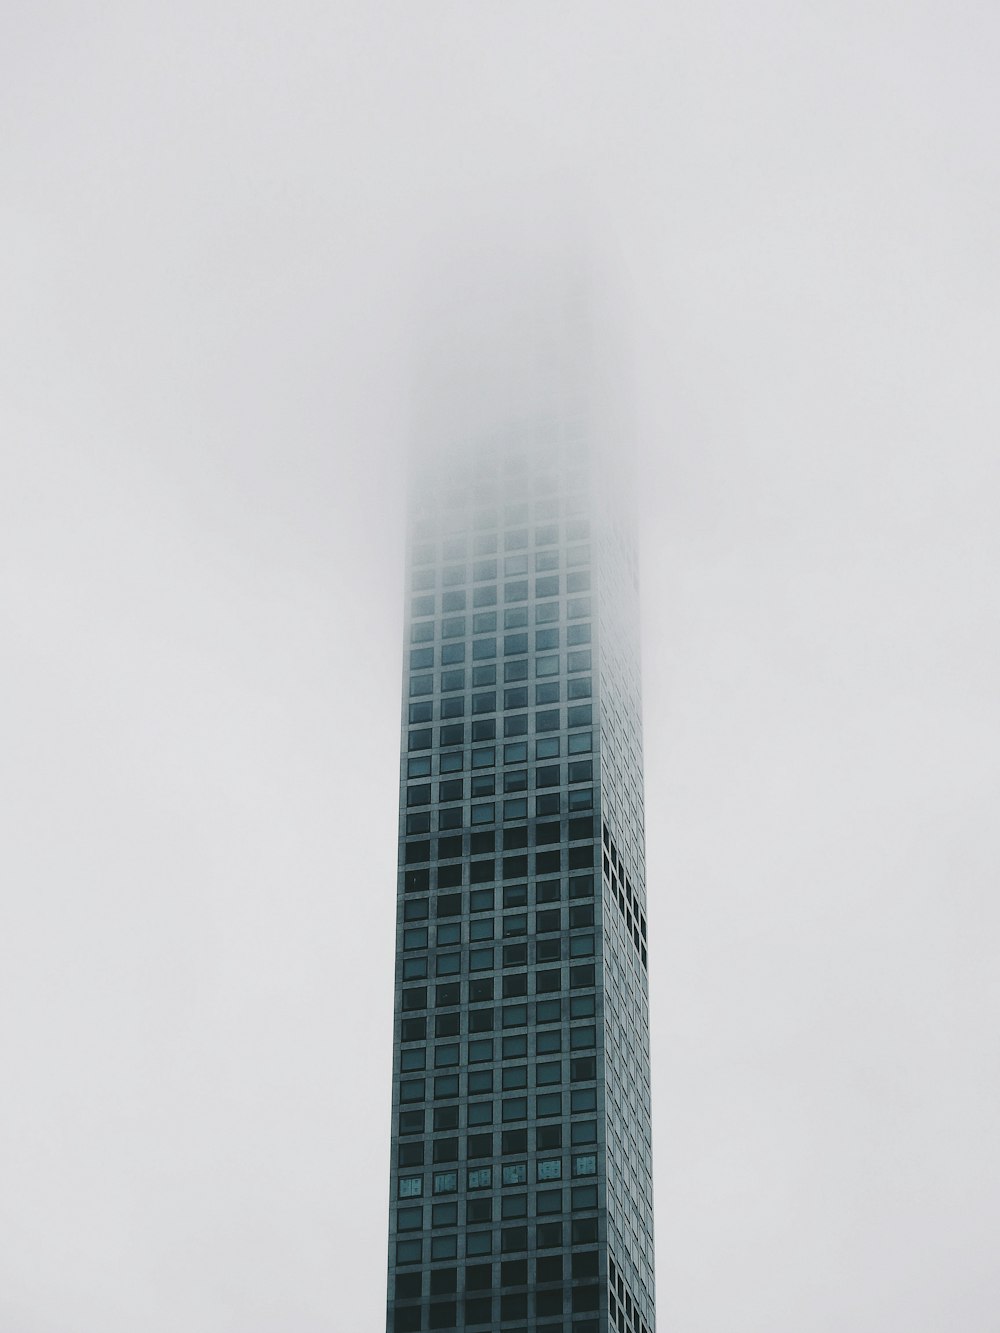 gray high rise building under white sky